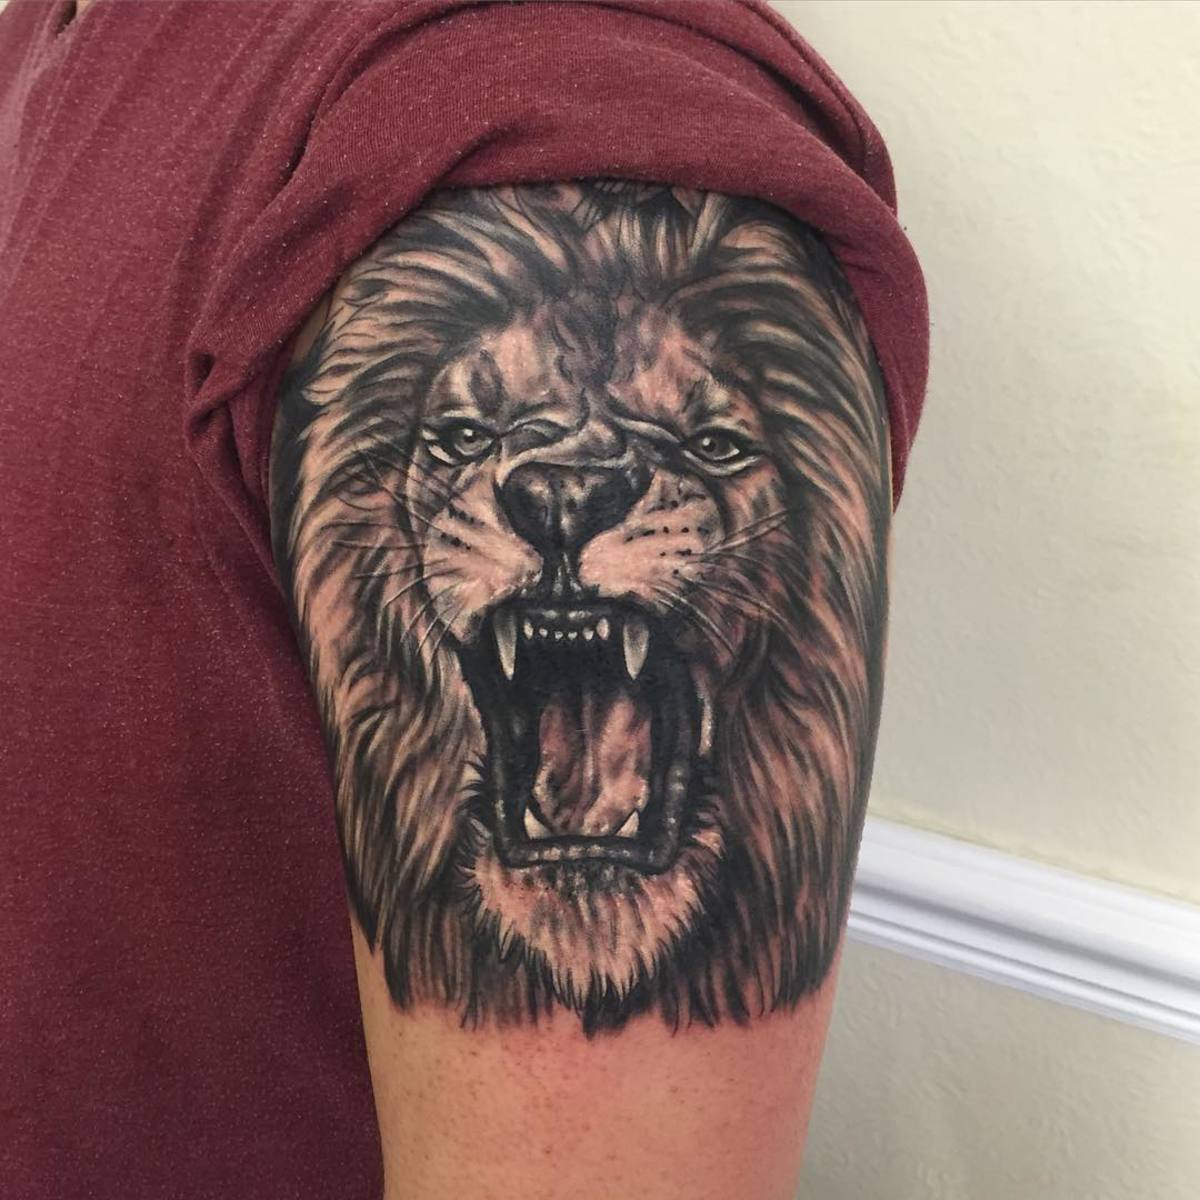 32 Best Lion Hand Tattoo Ideas Read This First, 55% OFF